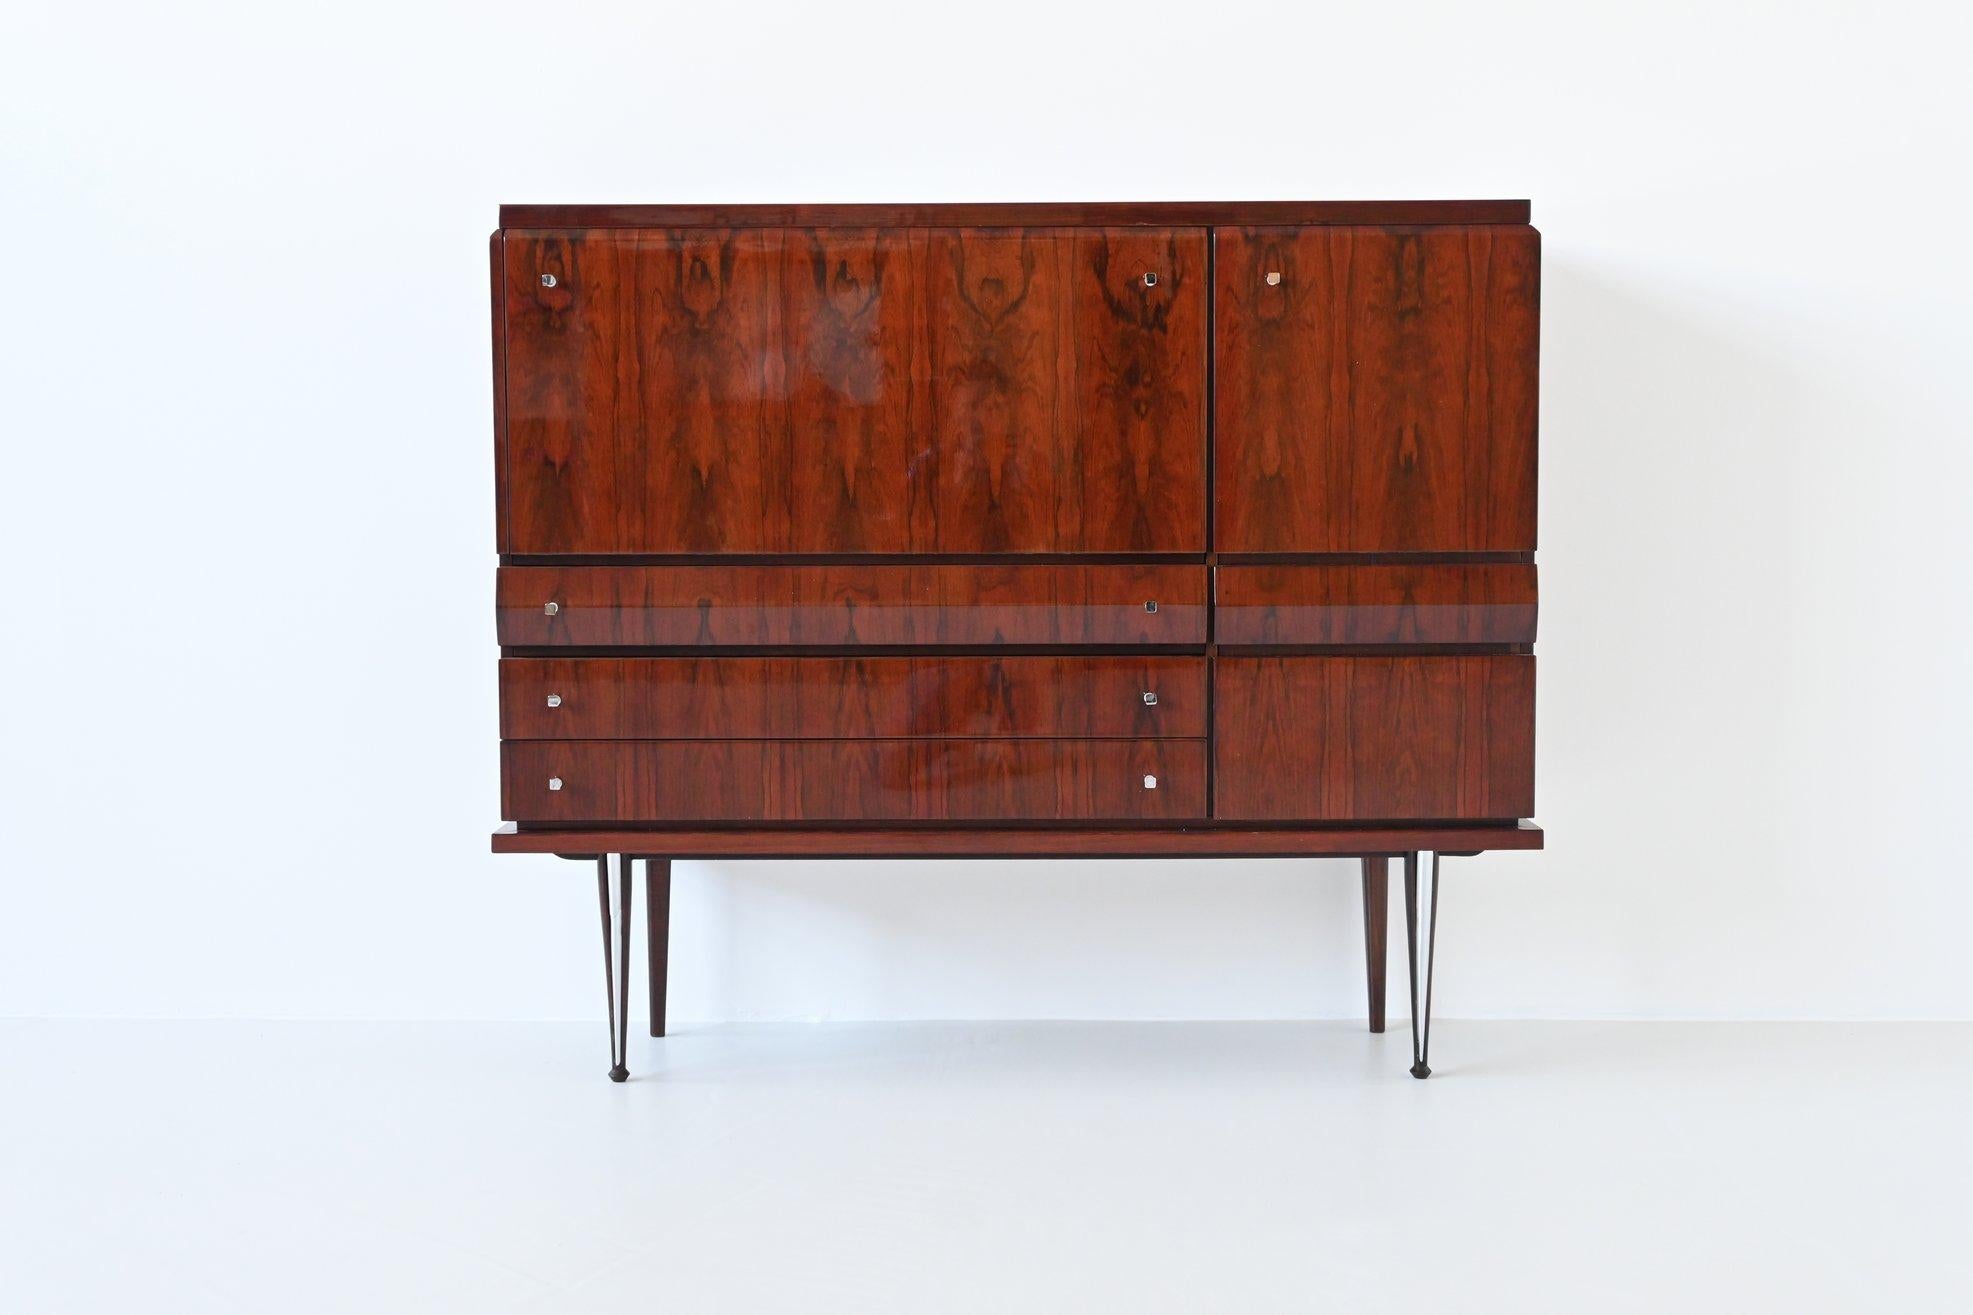 Beautiful shaped Italian buffet cabinet by unknown designer or manufacturer, Italy, 1960. This amazing buffet has a very nice rosewood grain and is in fully original condition. It is a very nicely crafted piece of Italian mid-century furniture. The